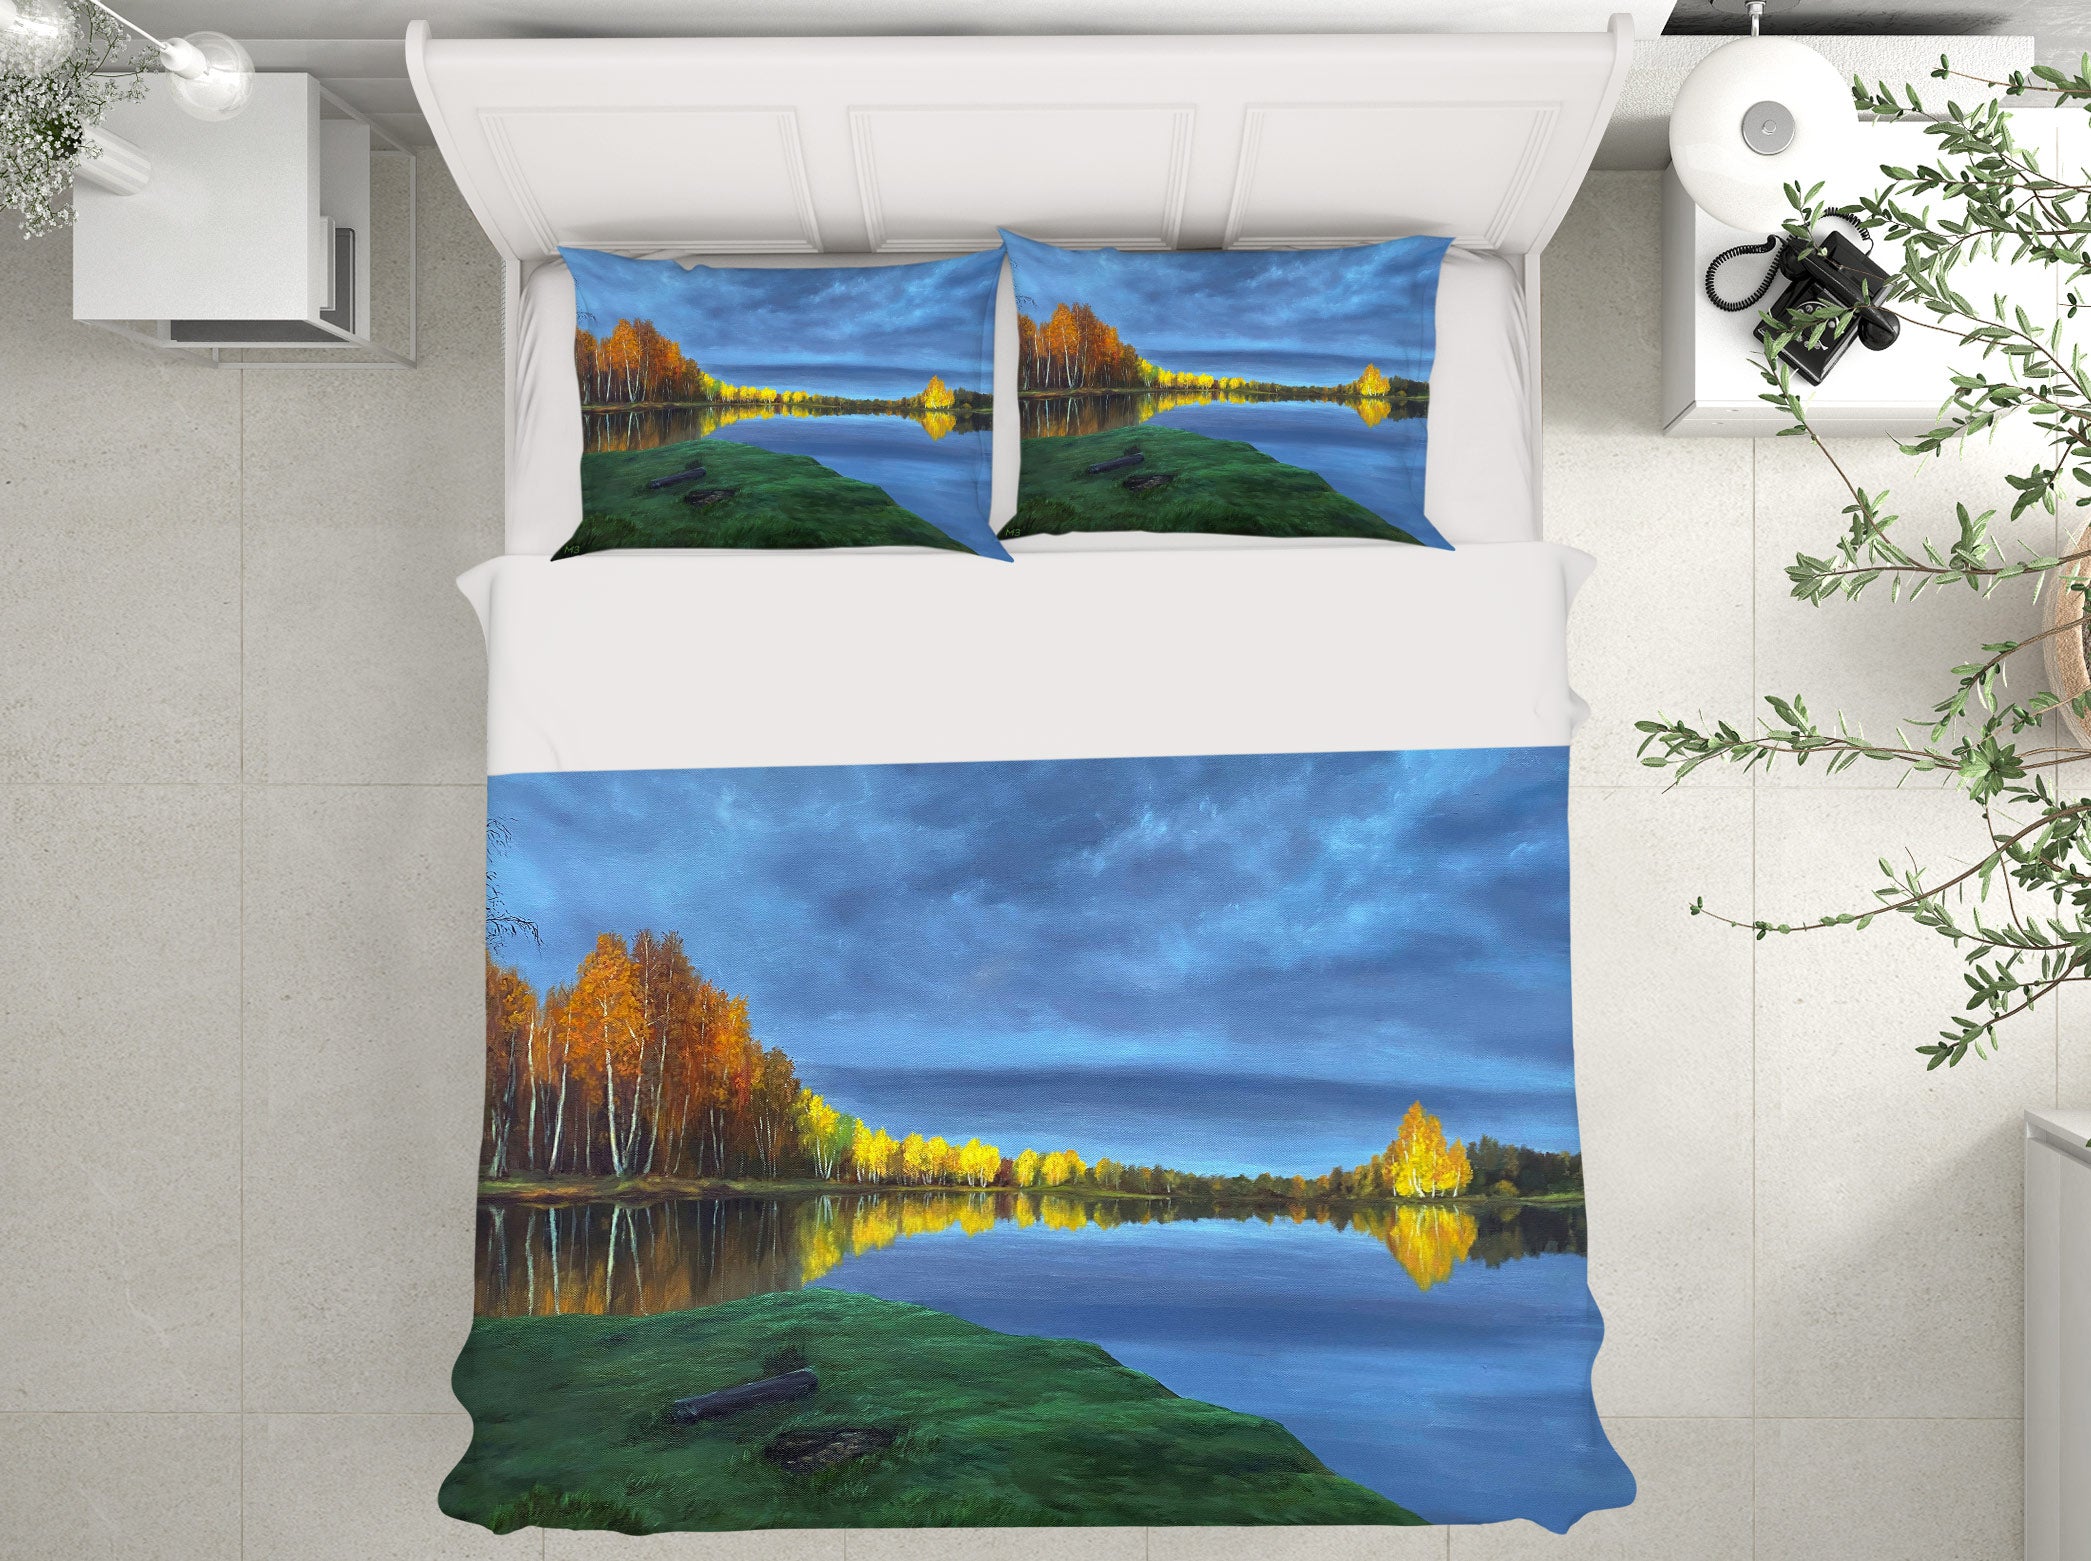 3D Lakeside Meadow 9785 Marina Zotova Bedding Bed Pillowcases Quilt